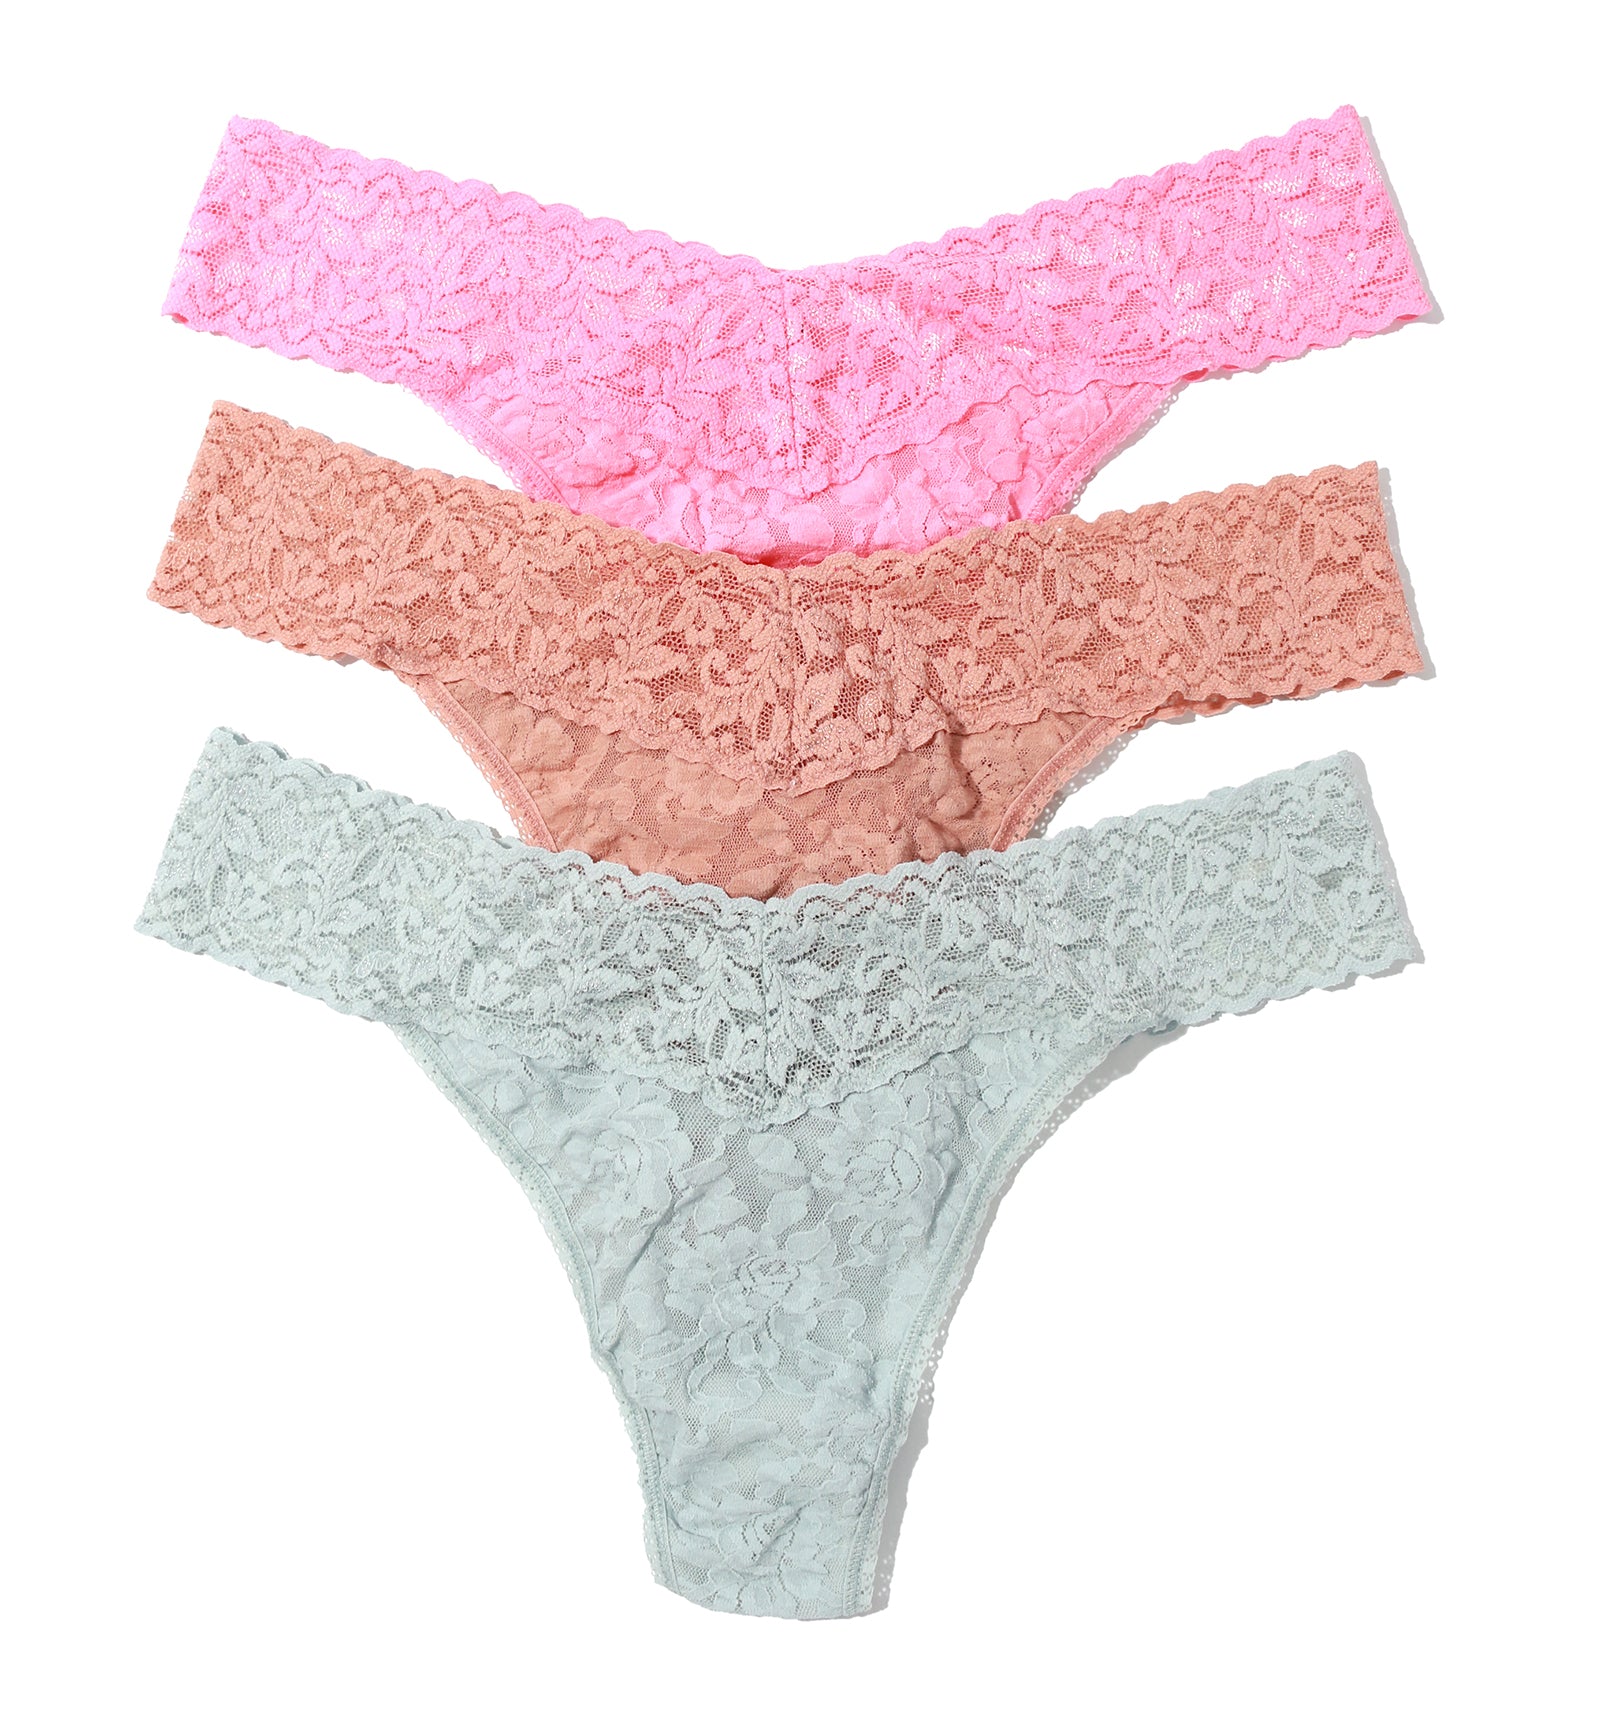 Hanky Panky 3-PACK Signature Lace Original Rise Thong (48113PK),Holiday23 IPCE - IPCE,One Size